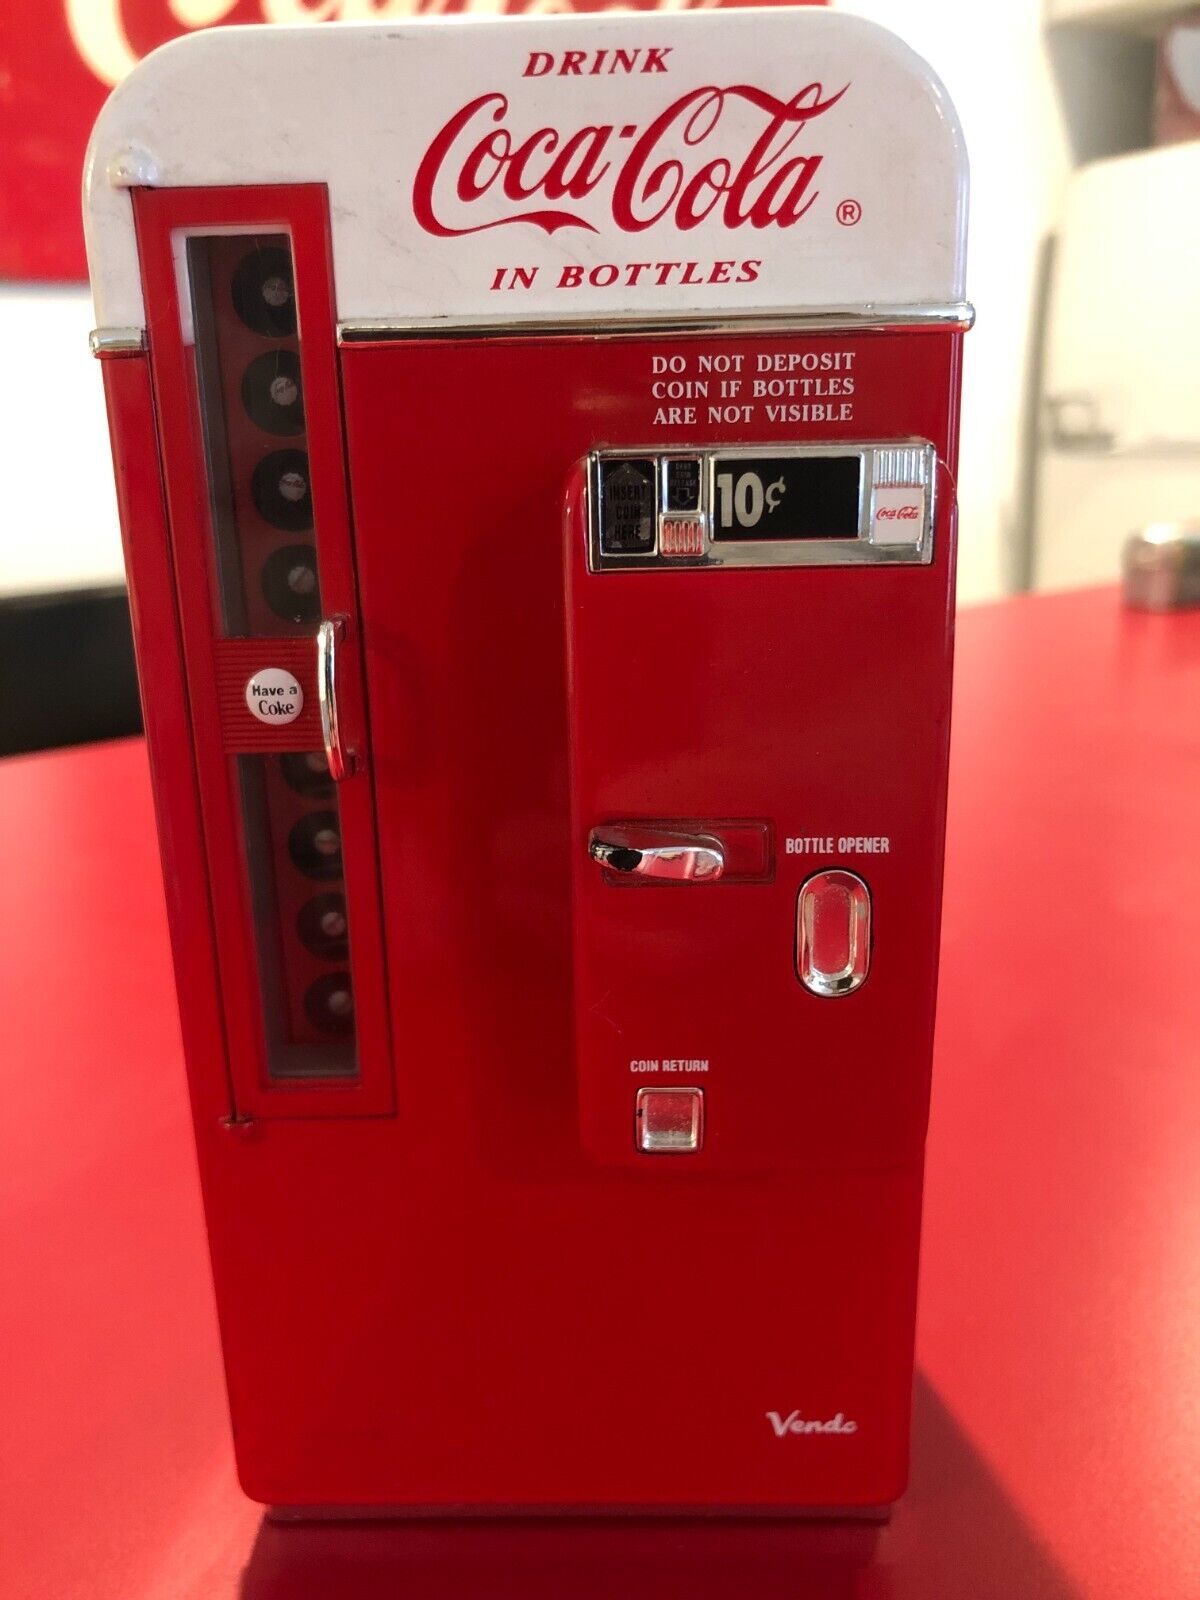 Vintage Coca-cola Vending Machine Bank Ck00257 Very Early Number Works Wth Sound